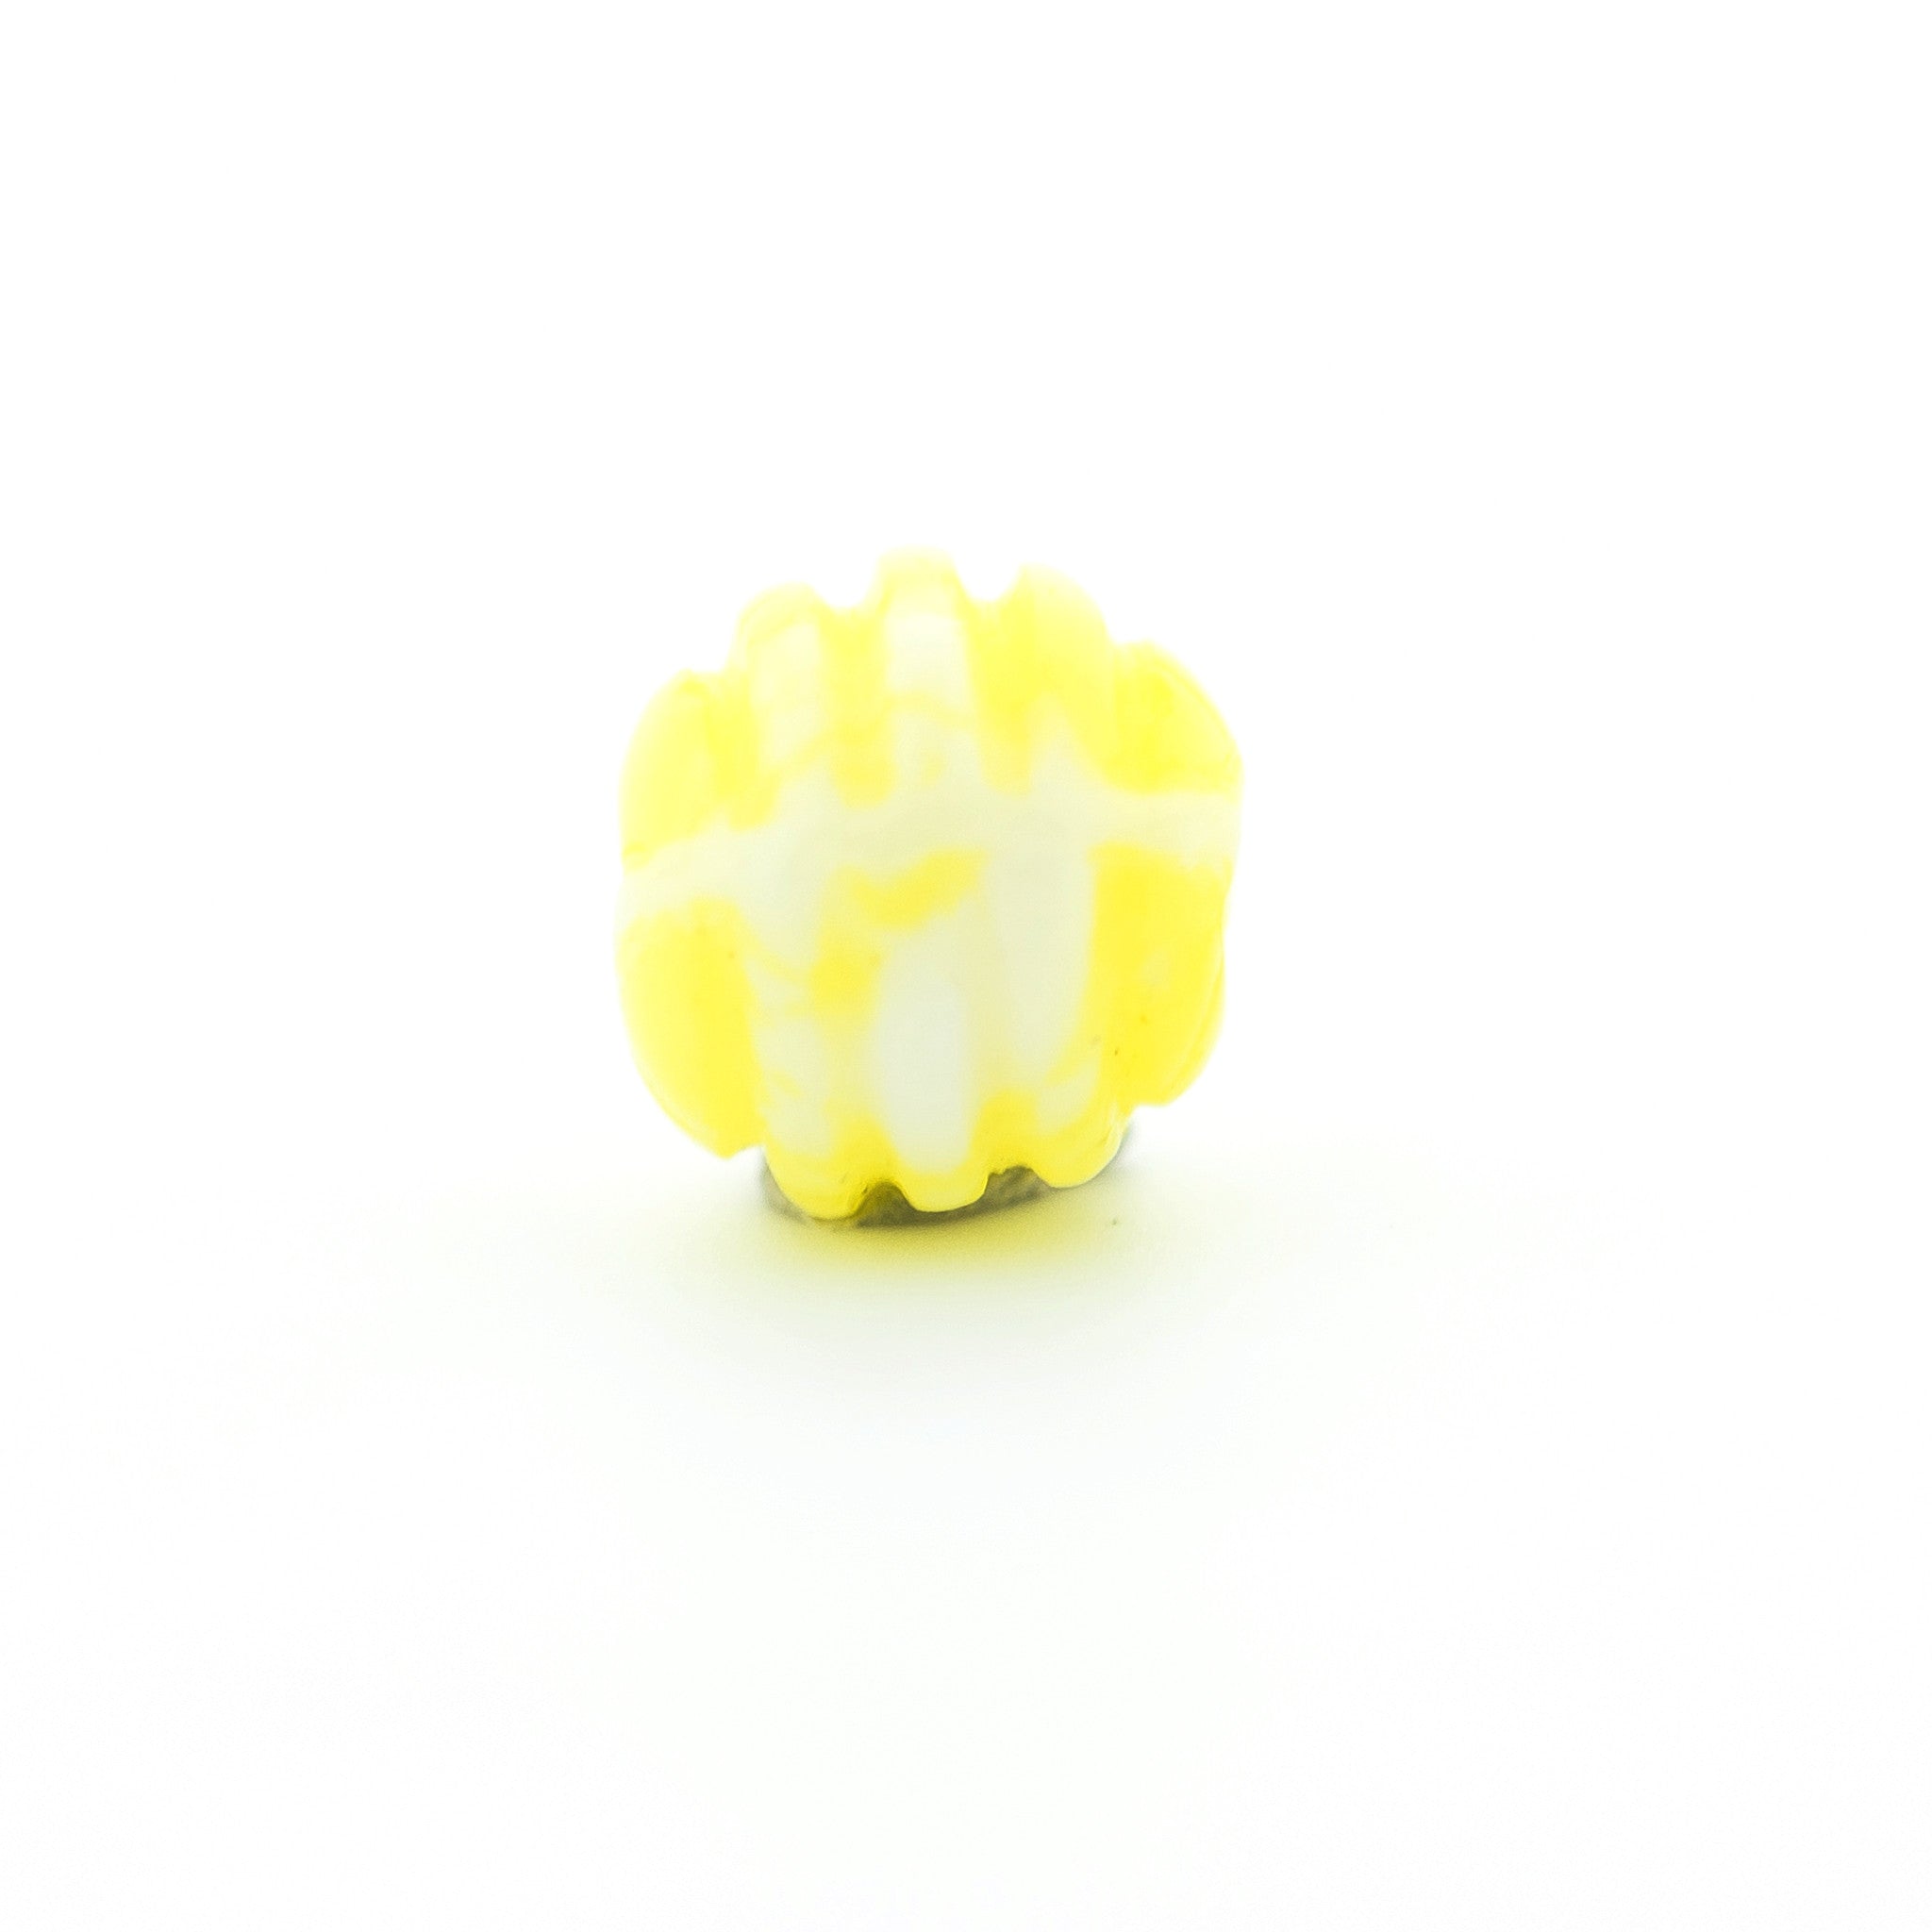 6MM Yellow Ribbed Glass Bead (144 pieces)